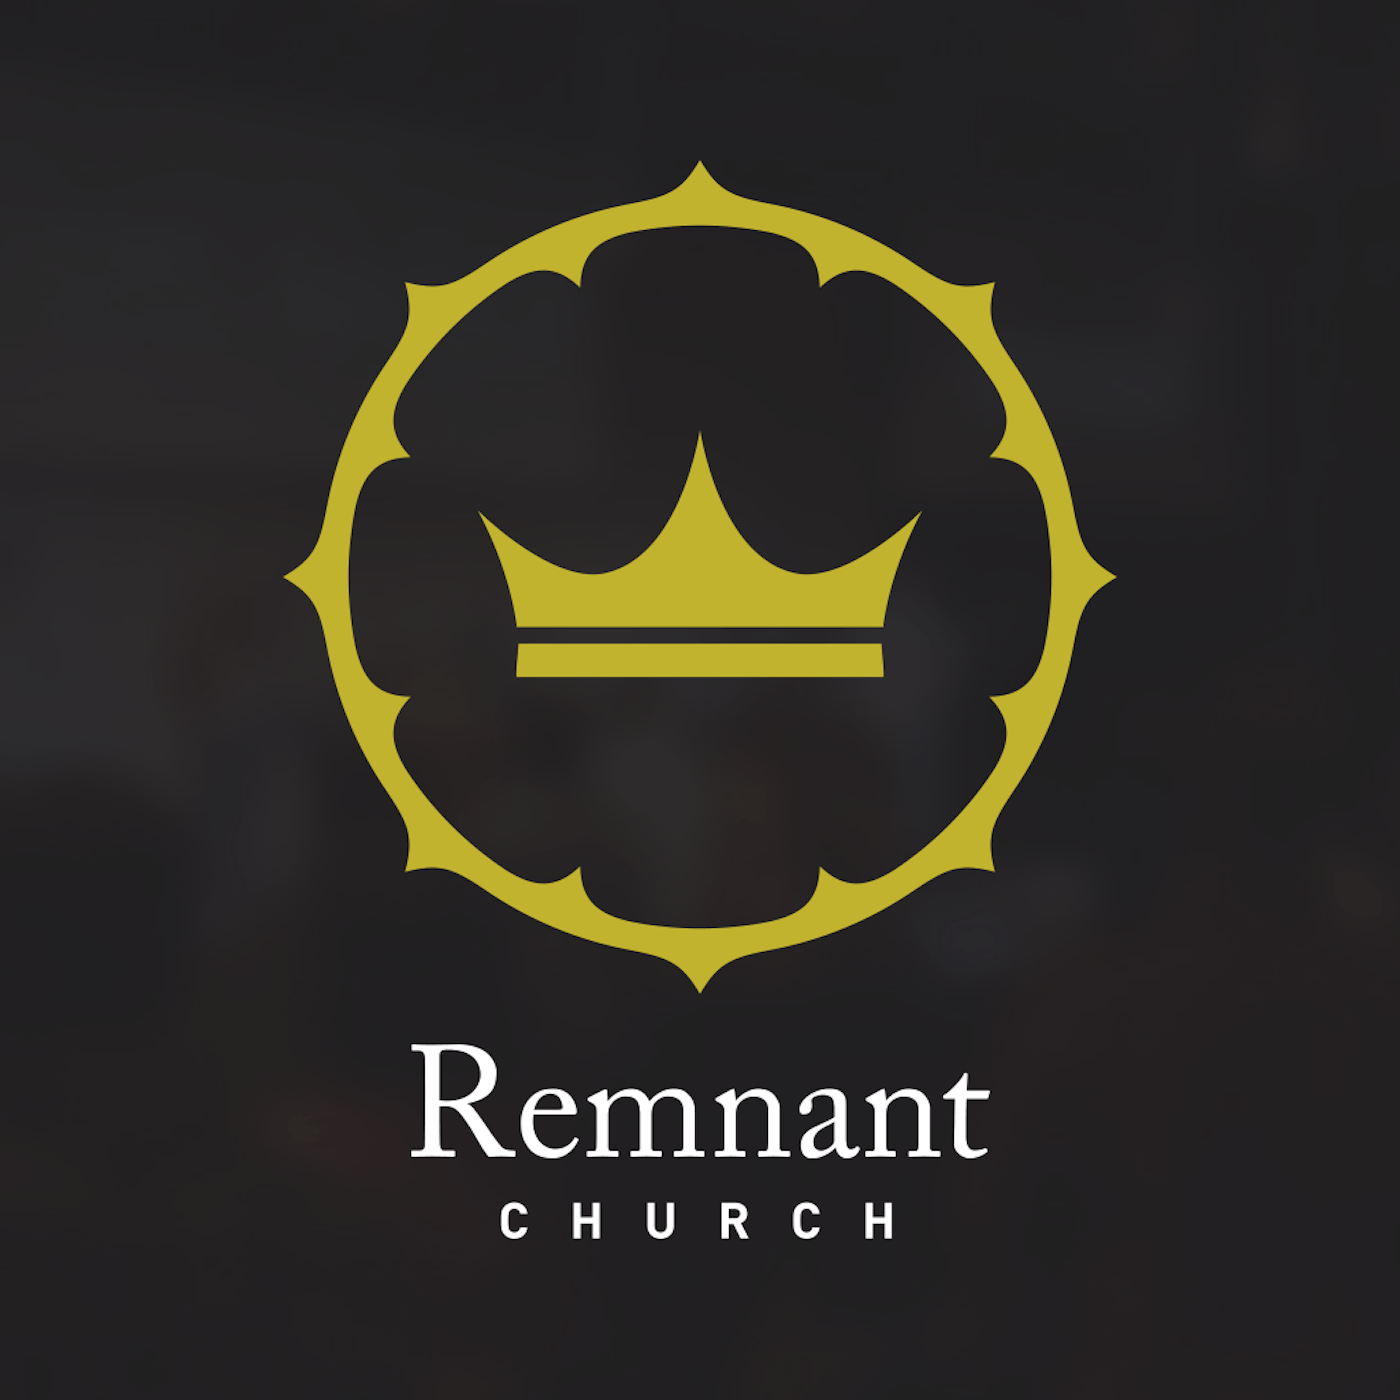 Remnant Logo - Southern Baptist Convention > Remnant Church